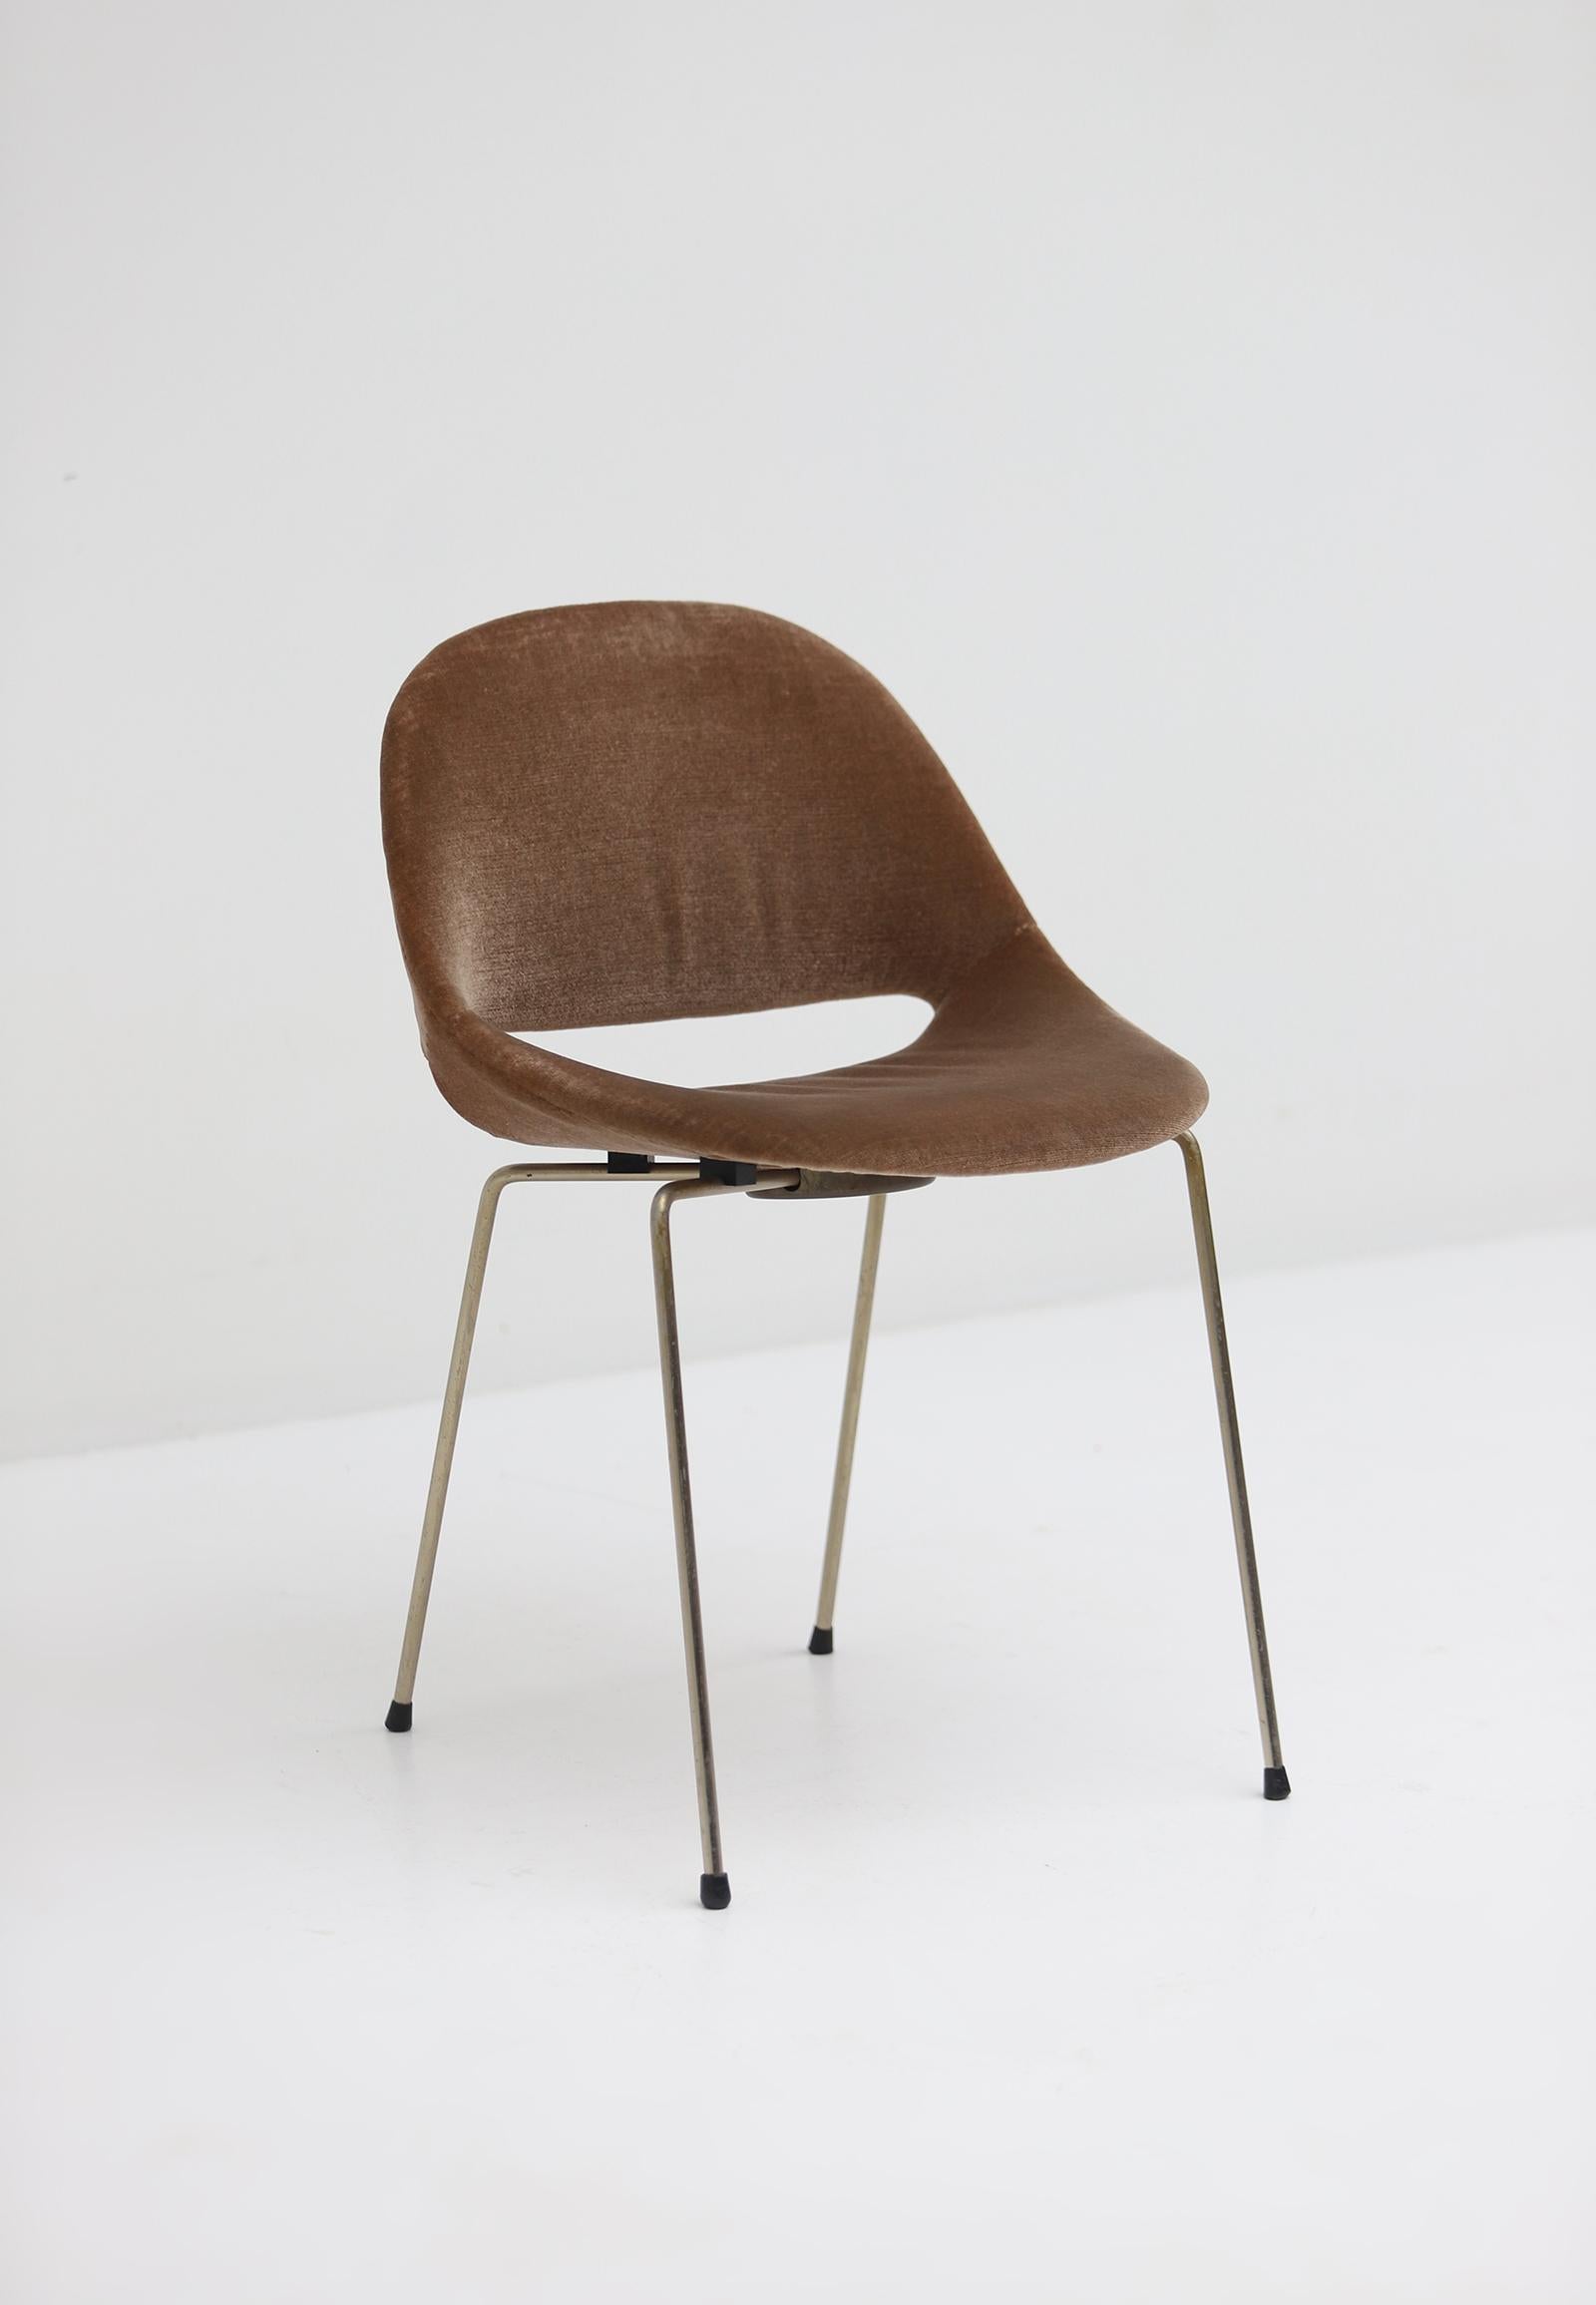 The SL58 chair was designed by Belgian architect Léon Stynen in 1958. It was made in collaboration with Stynen his assistant; architect Paul de Meyer. The chair was designed for Straatman, Loral & Cie, an Antwerp company that presented it at world